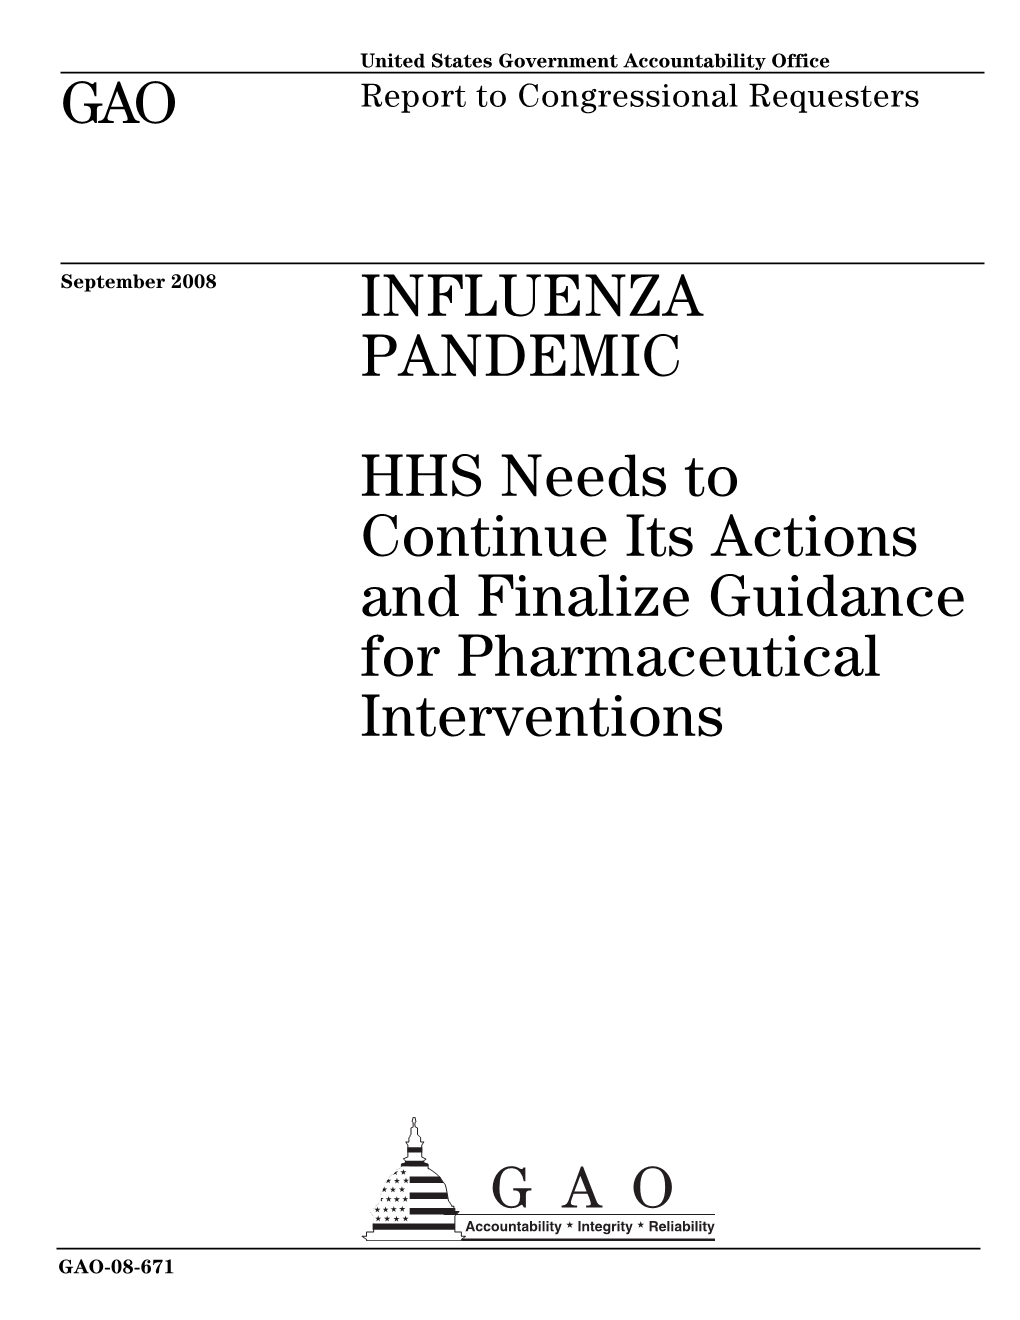 GAO-08-671 Influenza Pandemic: HHS Needs to Continue Its Actions and Finalize Guidance for Pharmaceutical Interventions